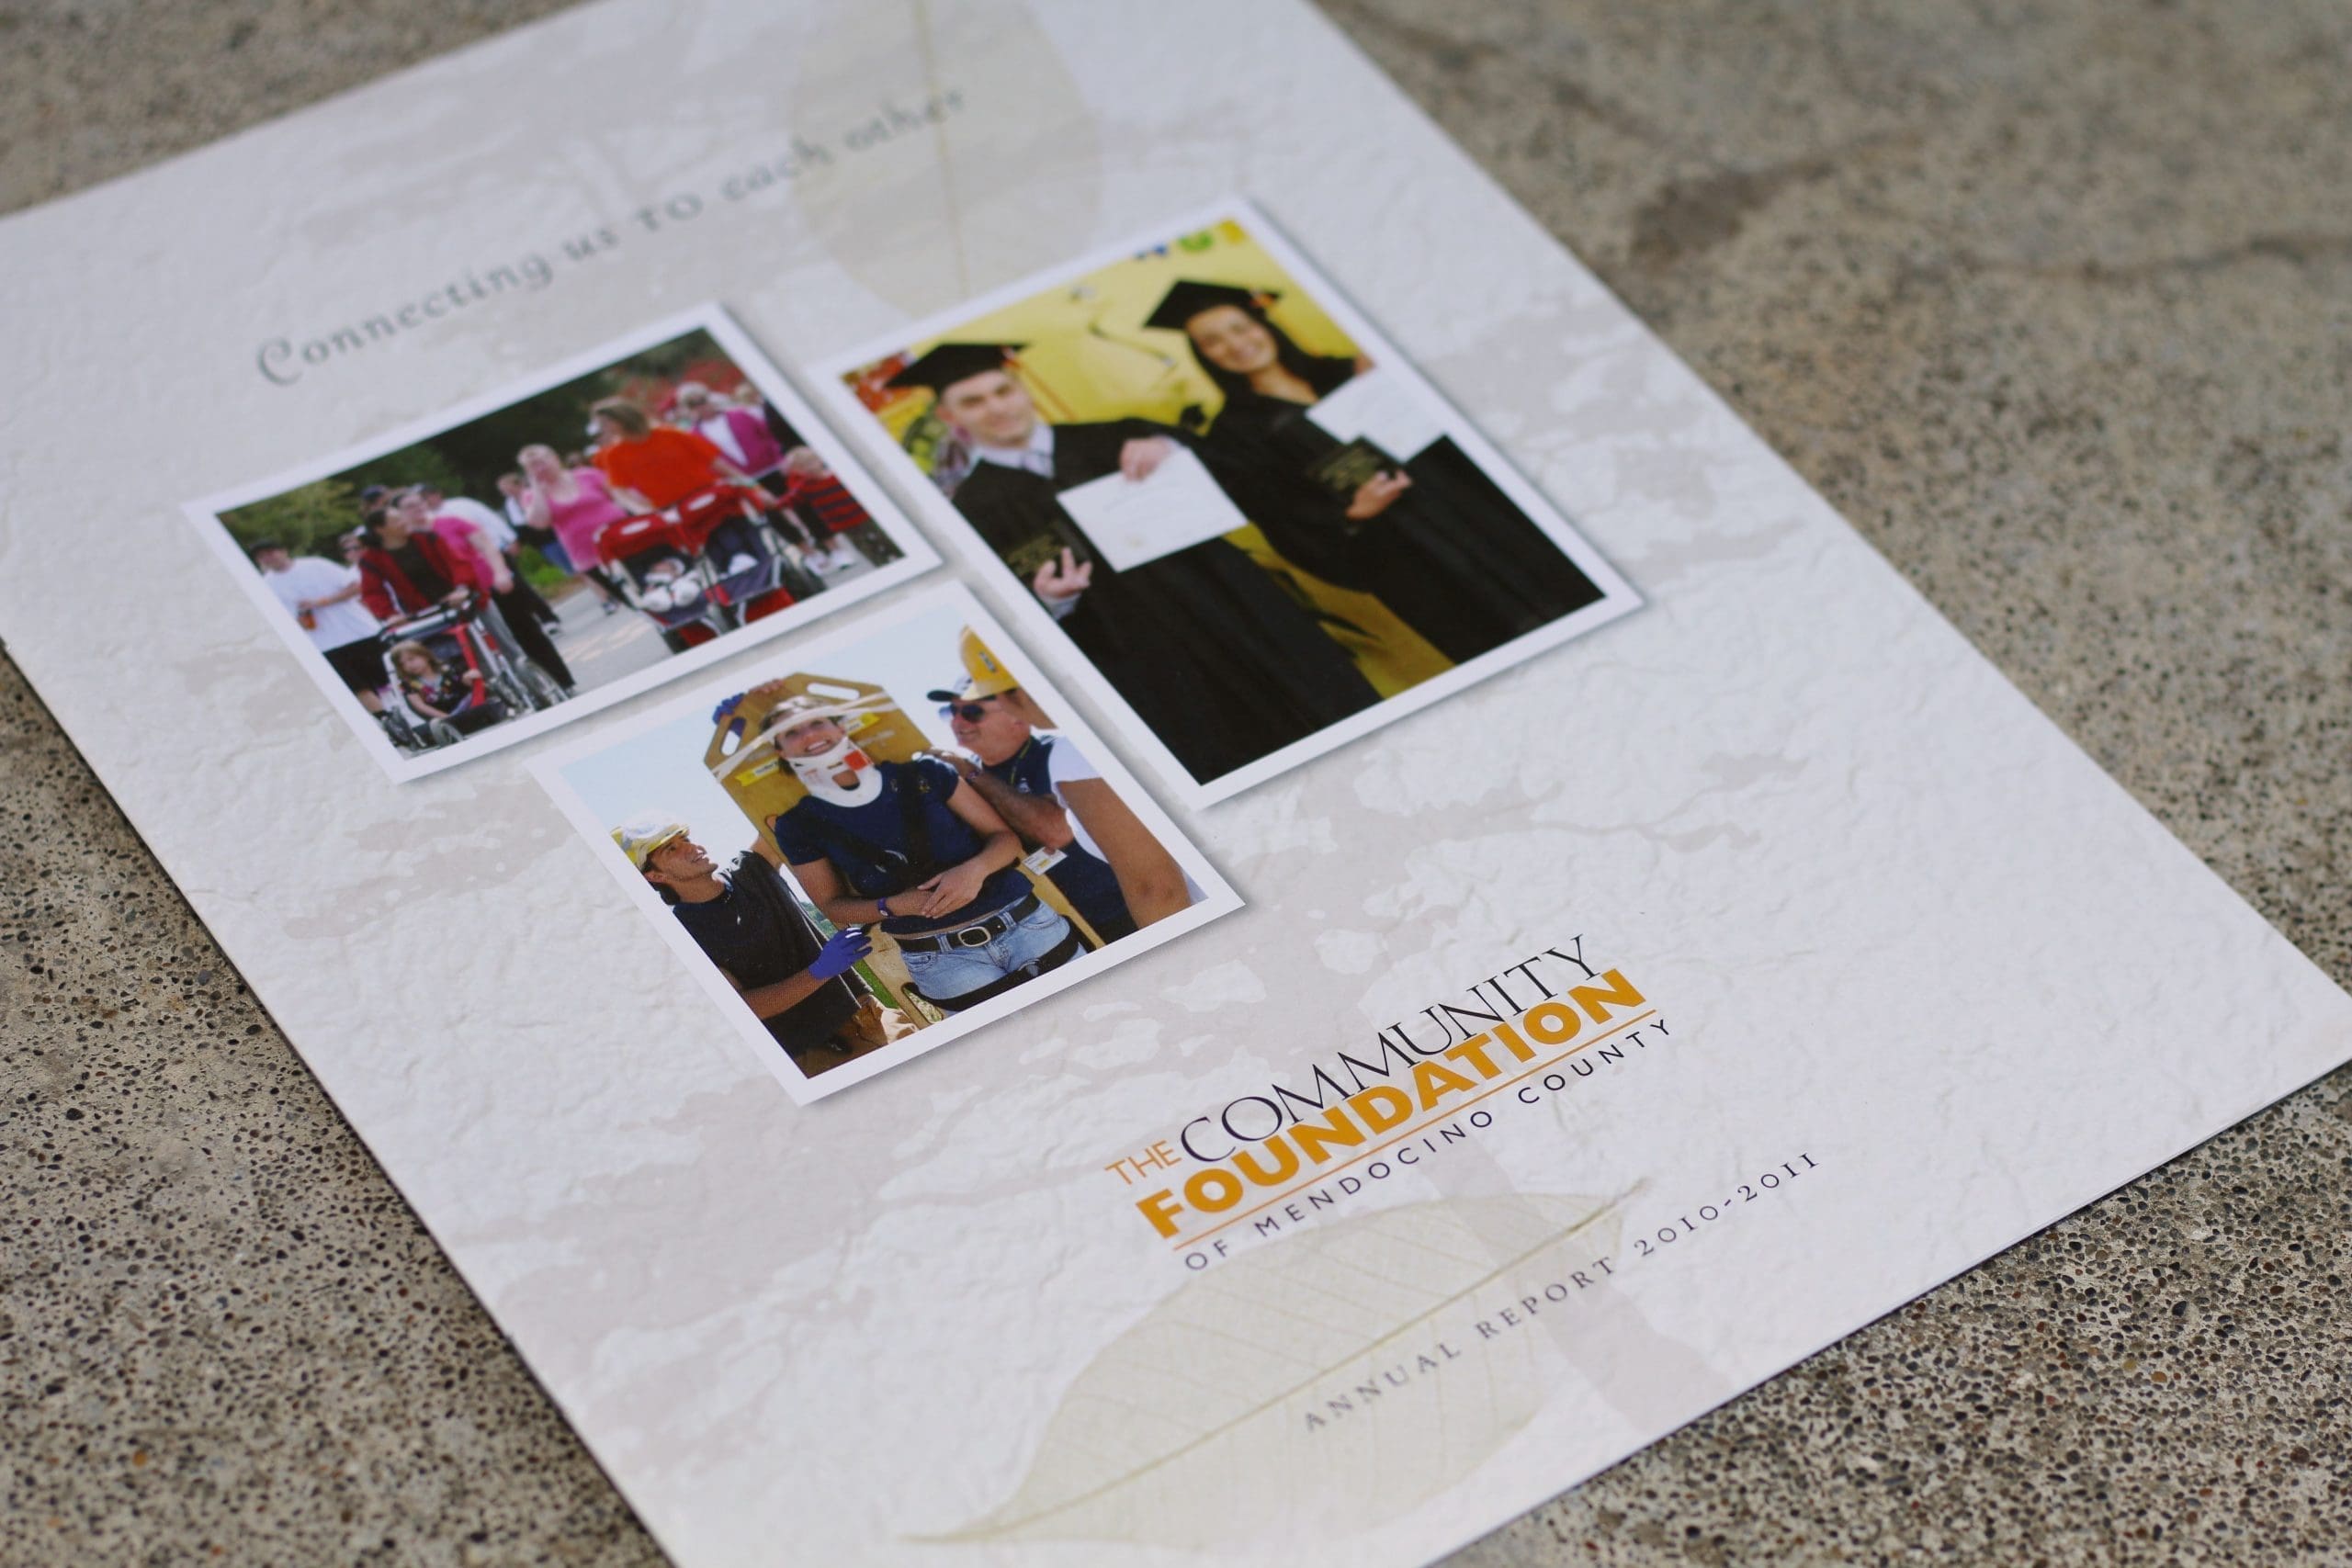 The Community Foundation Annual Report